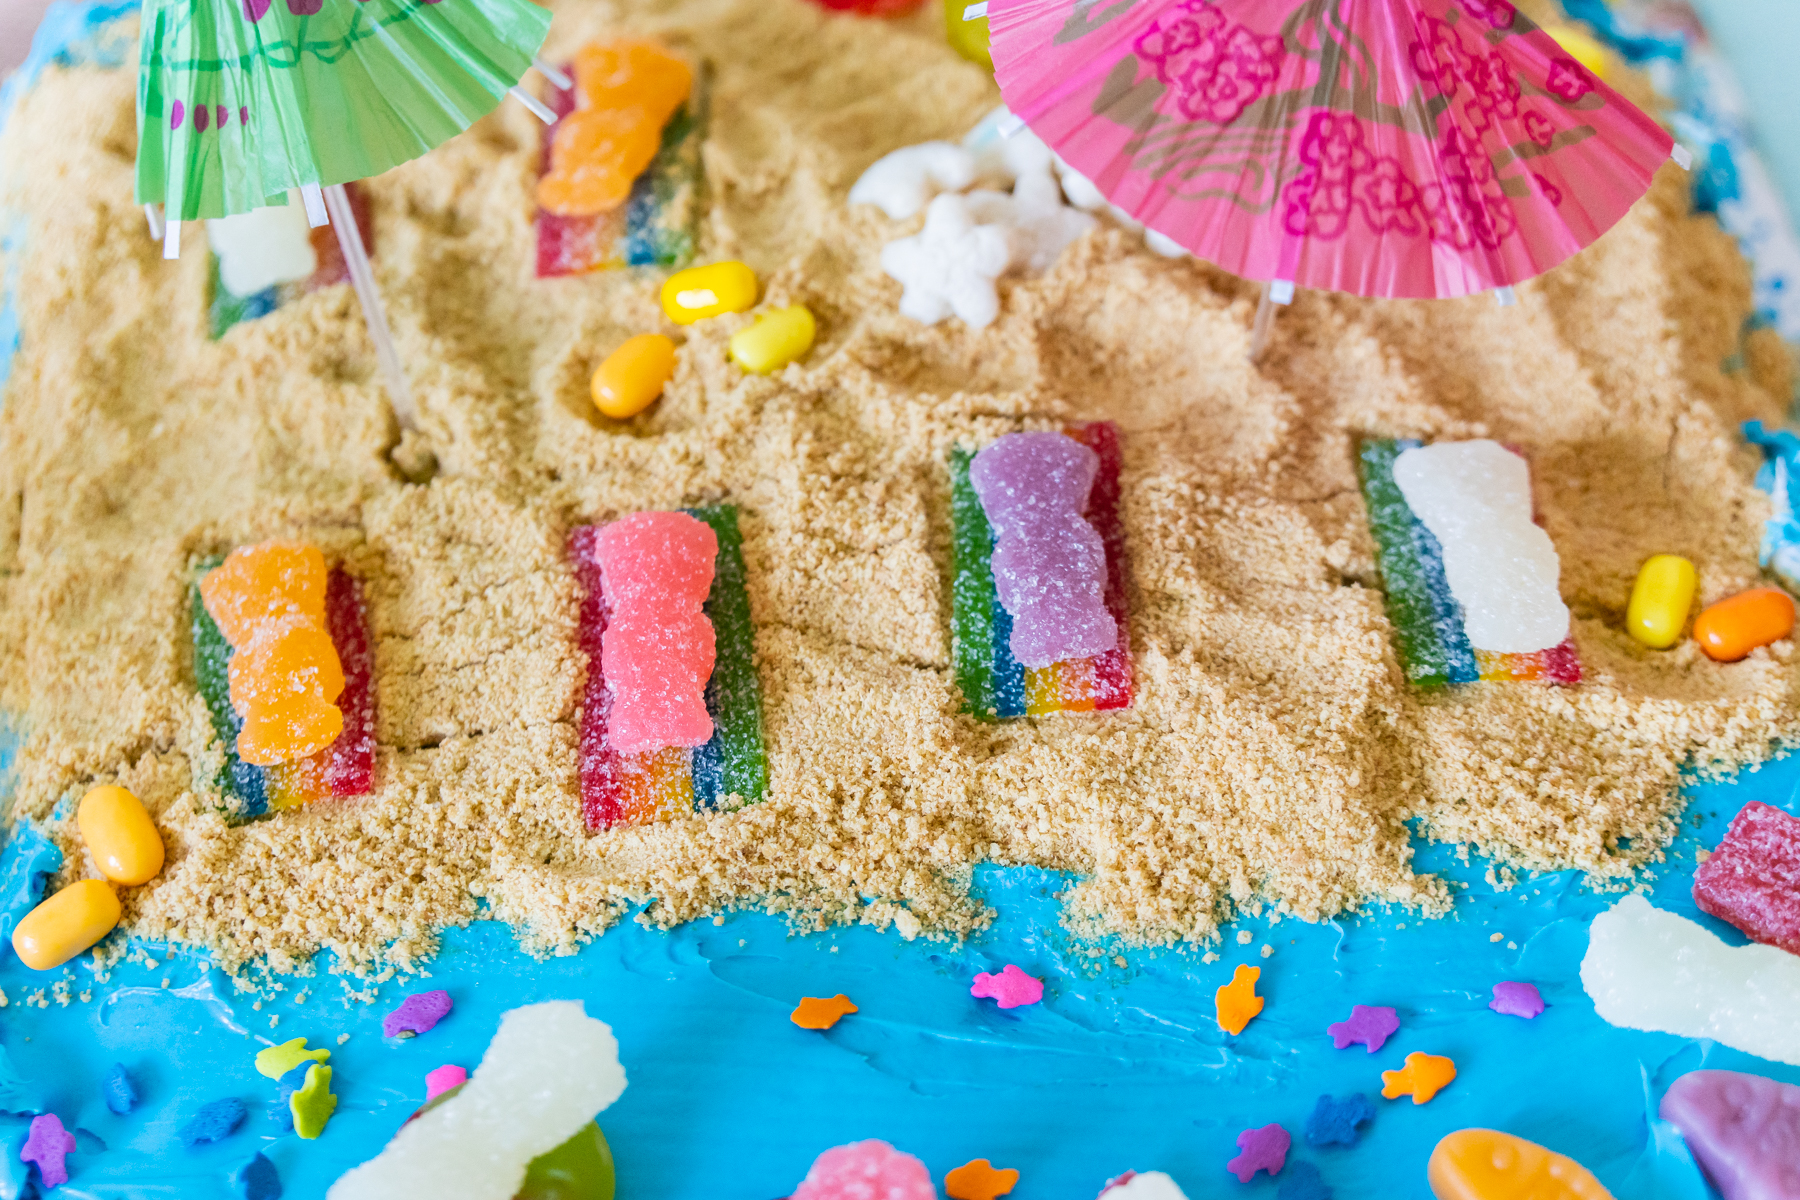 Sour Patch kids on a beach cake